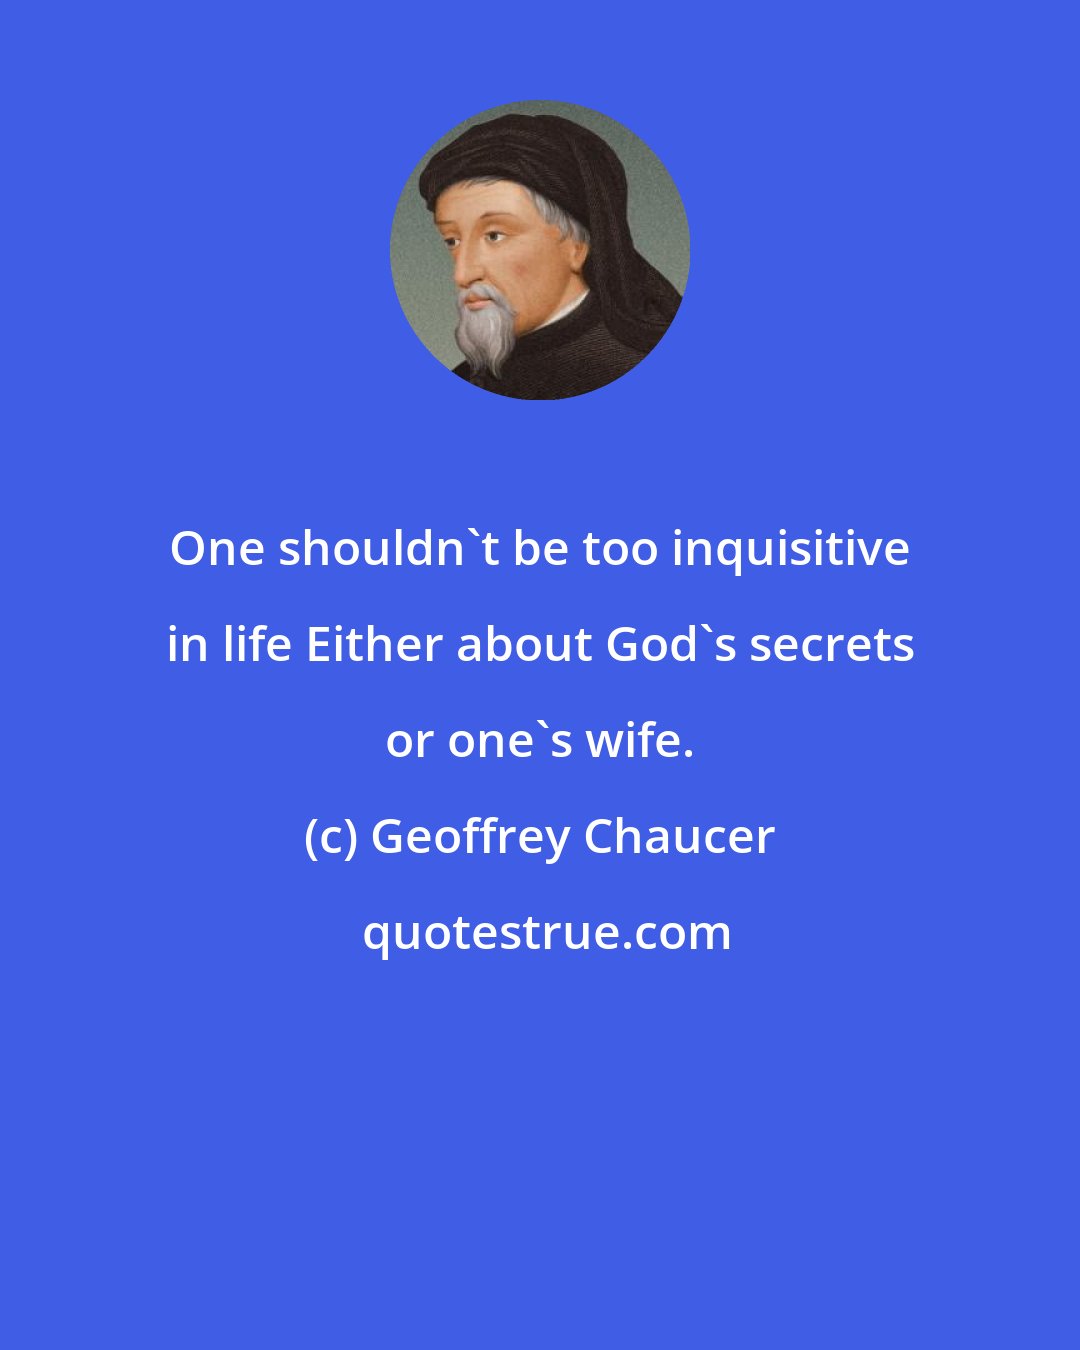 Geoffrey Chaucer: One shouldn't be too inquisitive in life Either about God's secrets or one's wife.